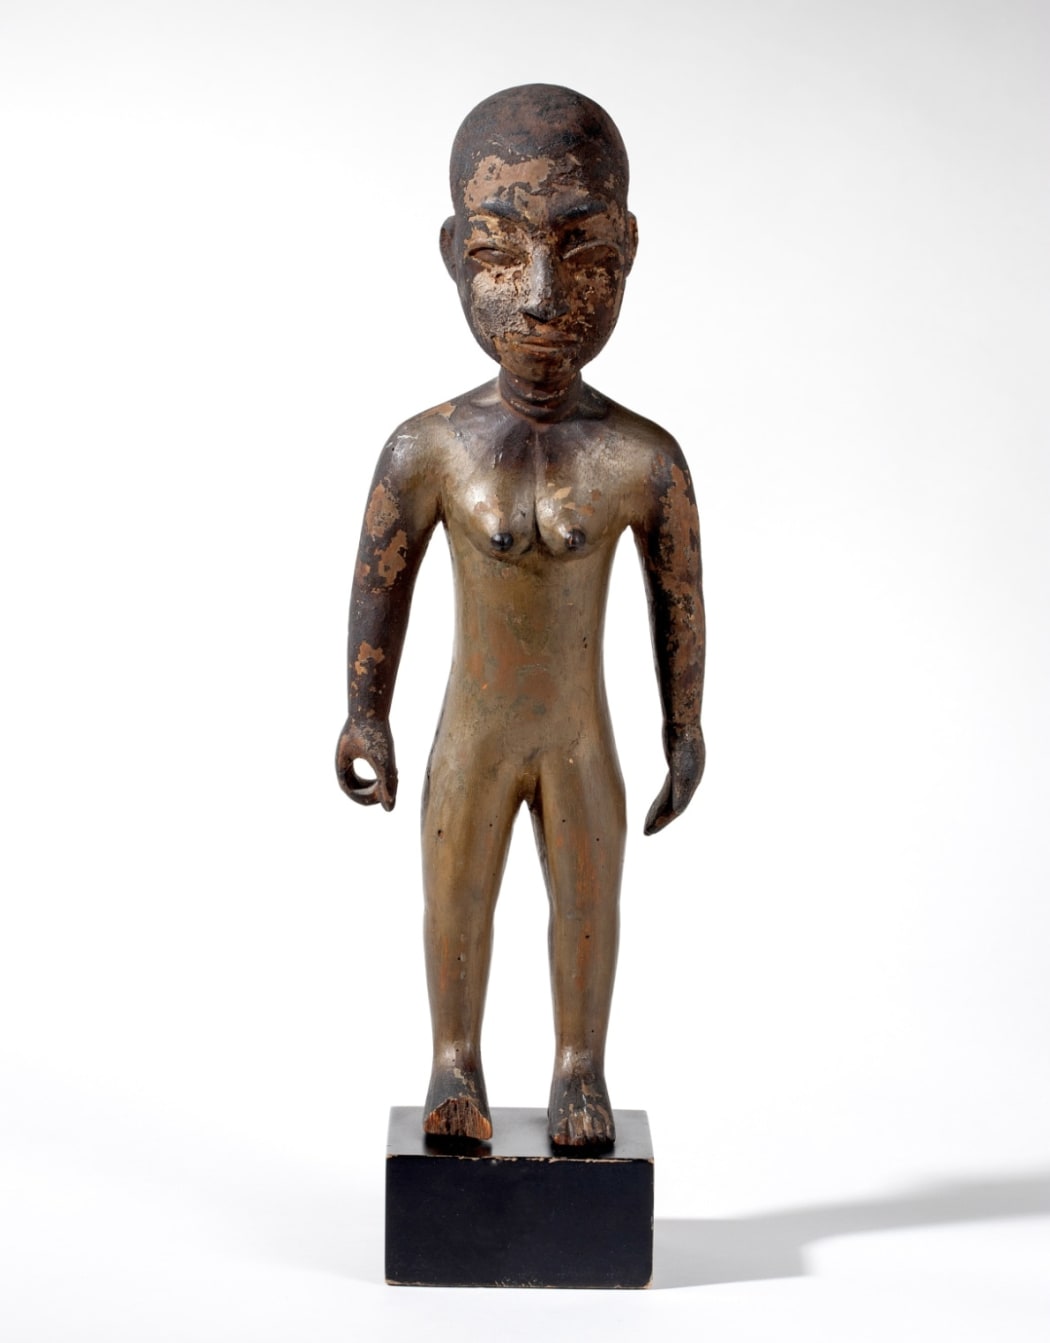 When classical African art isn’t anonymous: a statue by Osei Bonsu